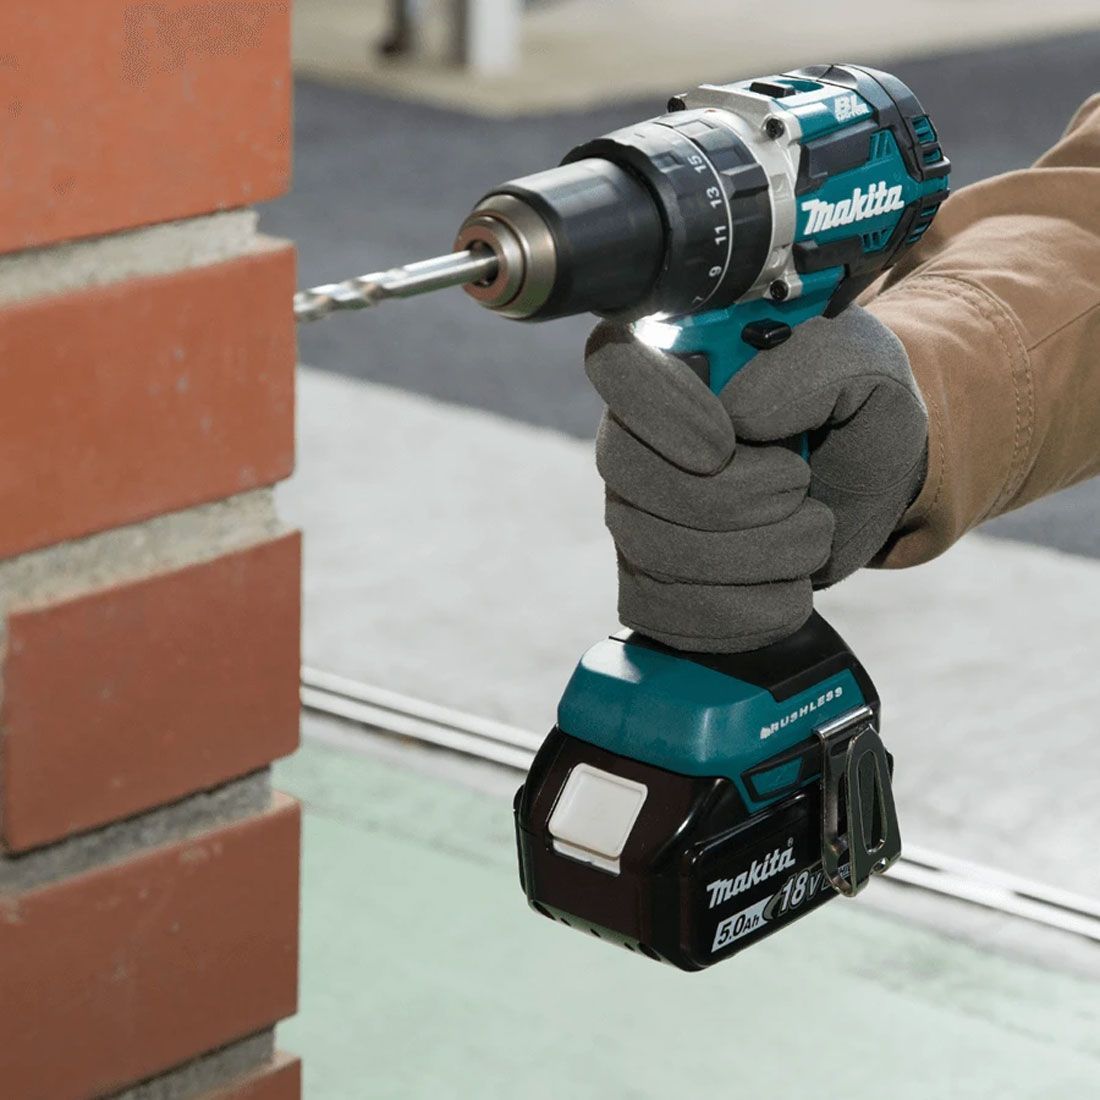 nurse origin is there Makita DHP484Z 18v LXT Brushless 2-Speed Combi Drill Body Only | Powertool  World